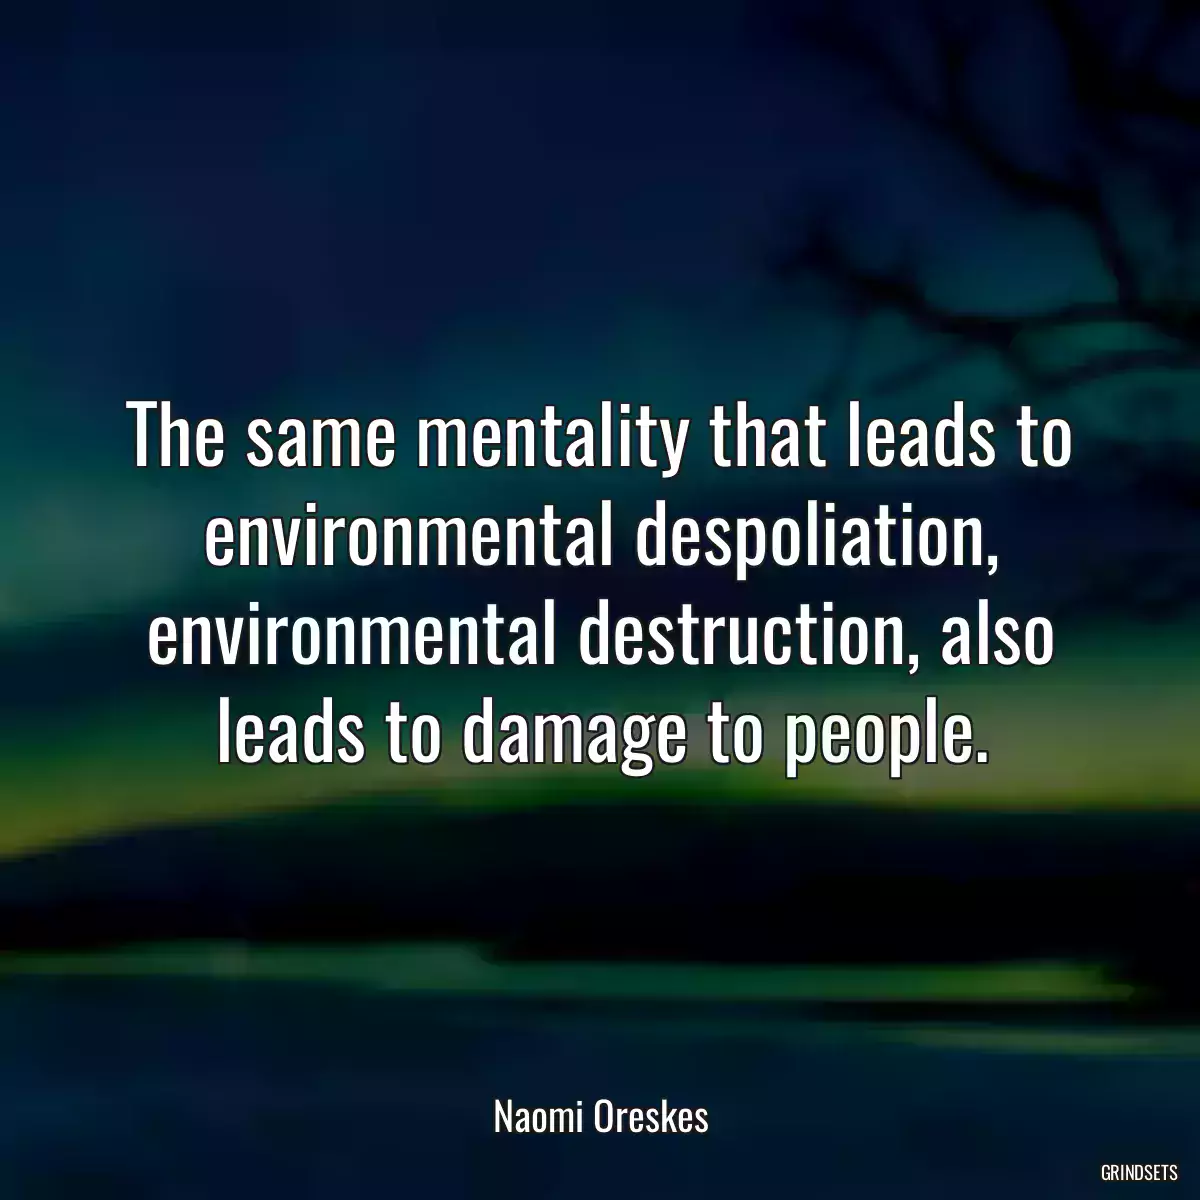 The same mentality that leads to environmental despoliation, environmental destruction, also leads to damage to people.